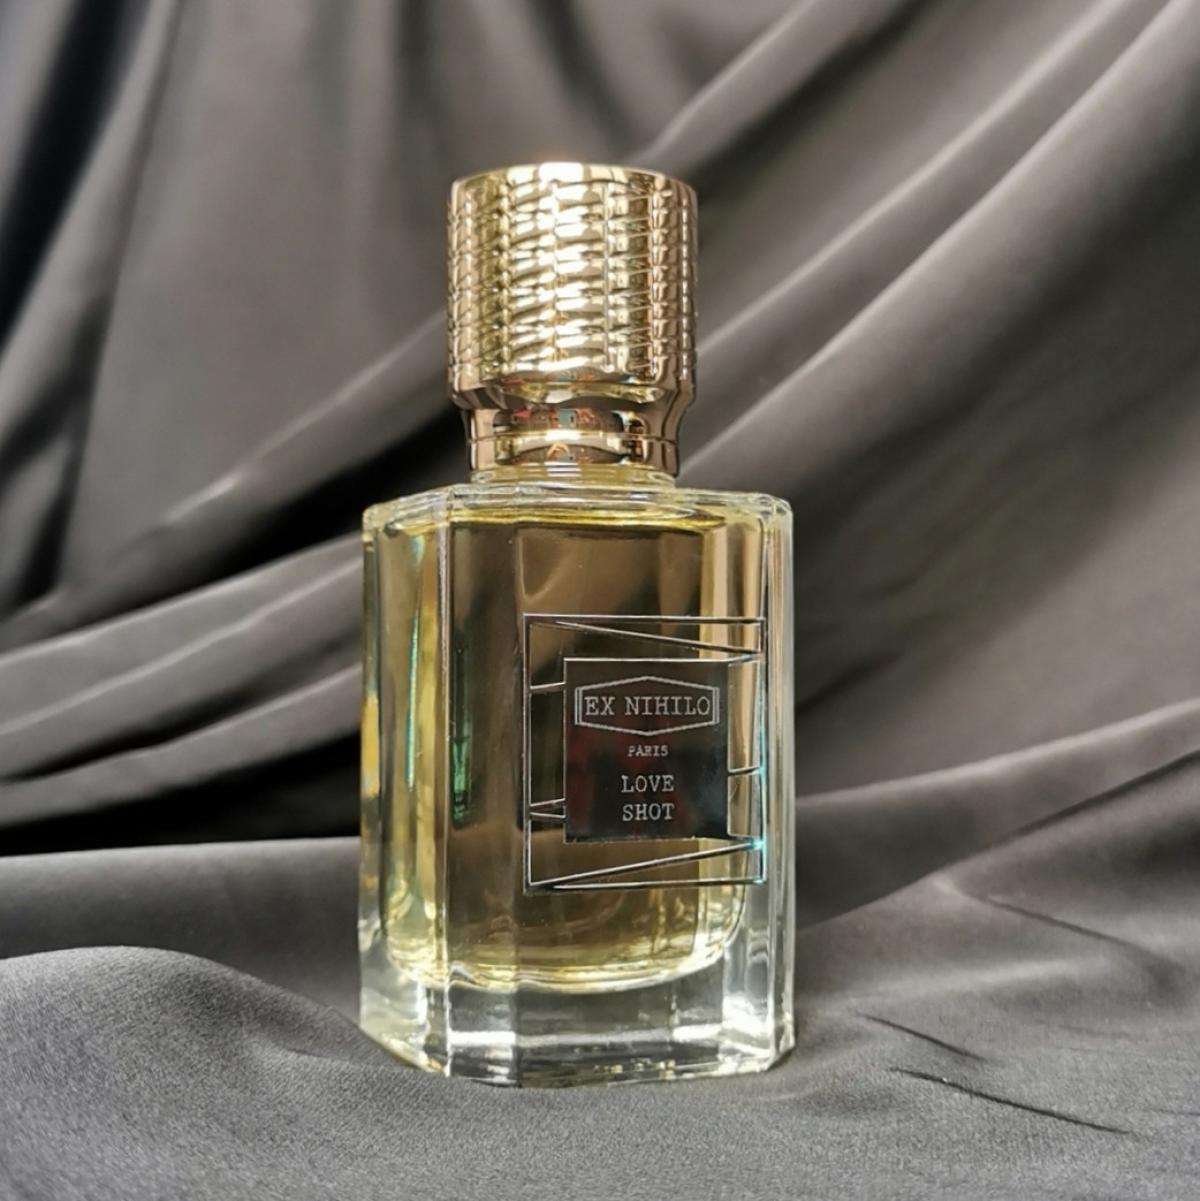 Love Shot Ex Nihilo perfume - a fragrance for women and men 2016